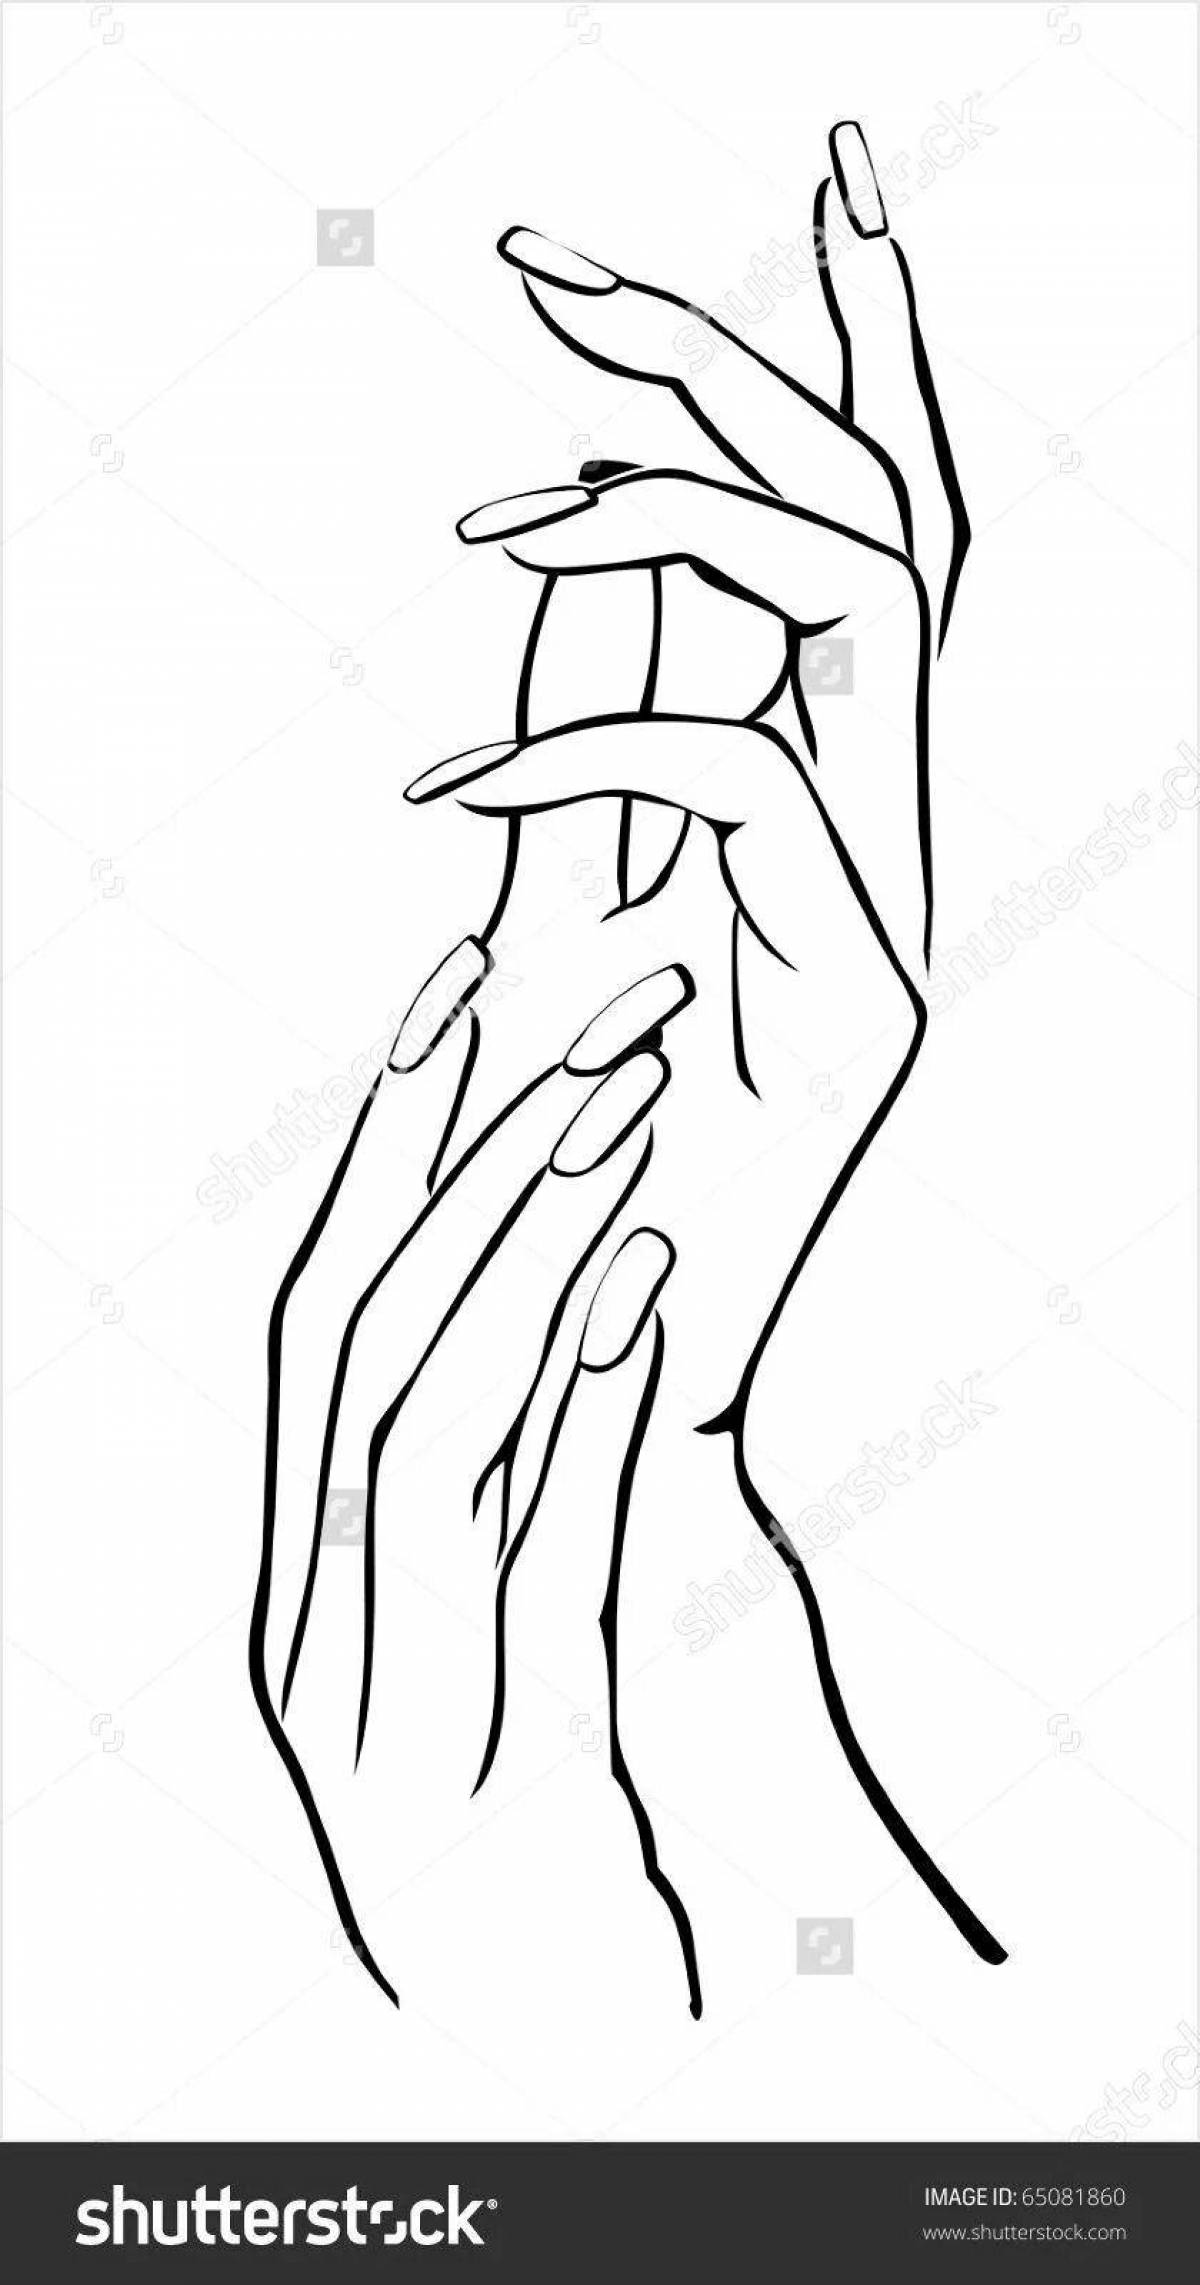 Coloring page festive female hand